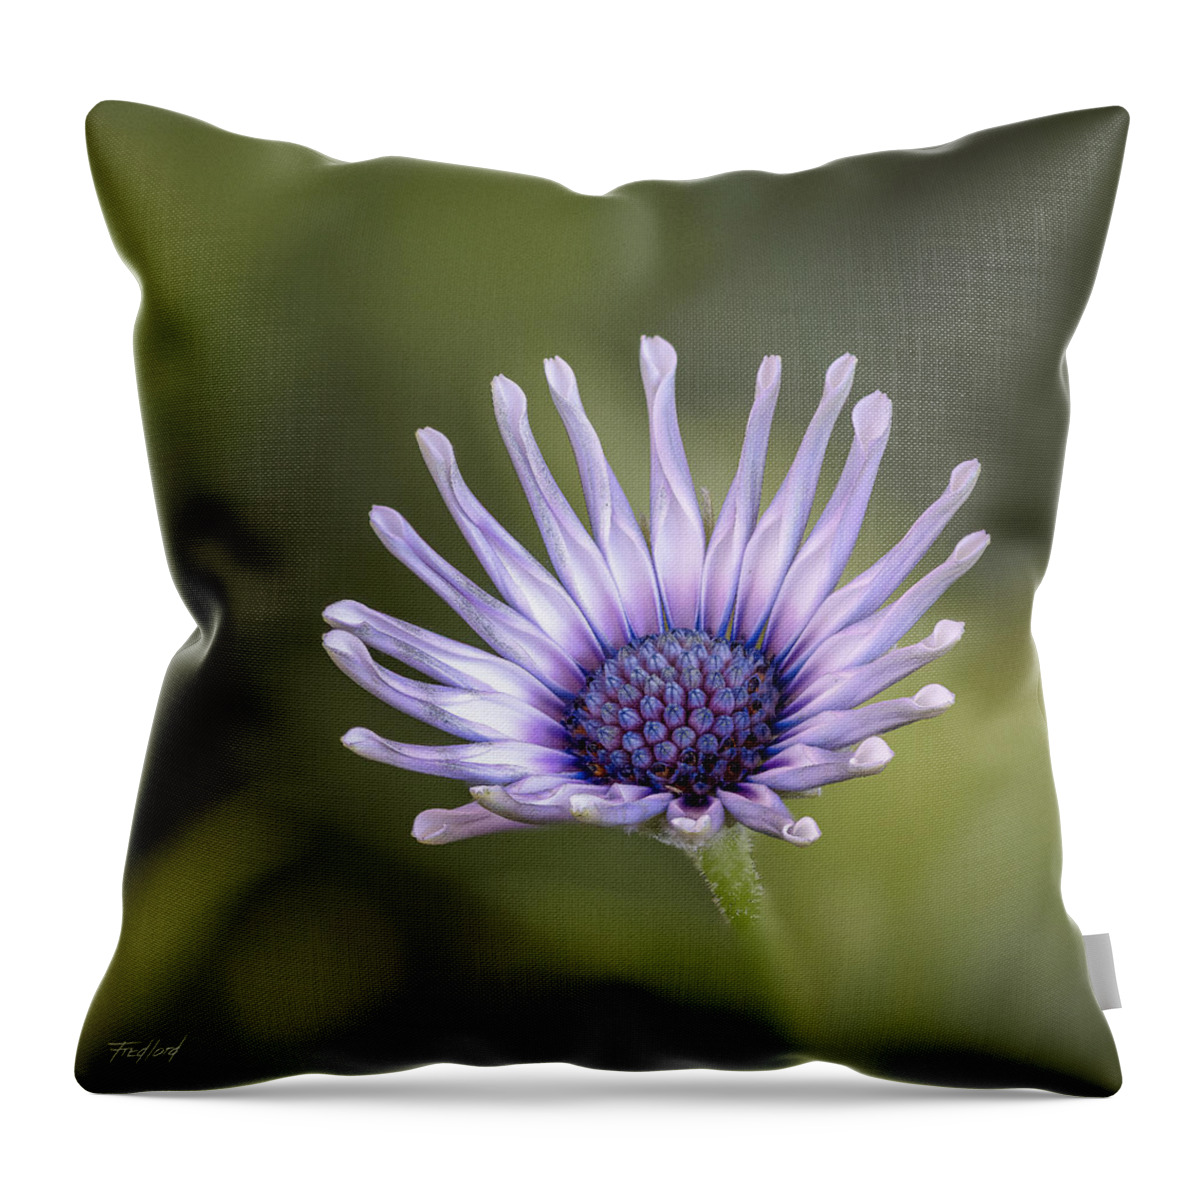 Daisy Throw Pillow featuring the photograph Osteospermum by Fred J Lord